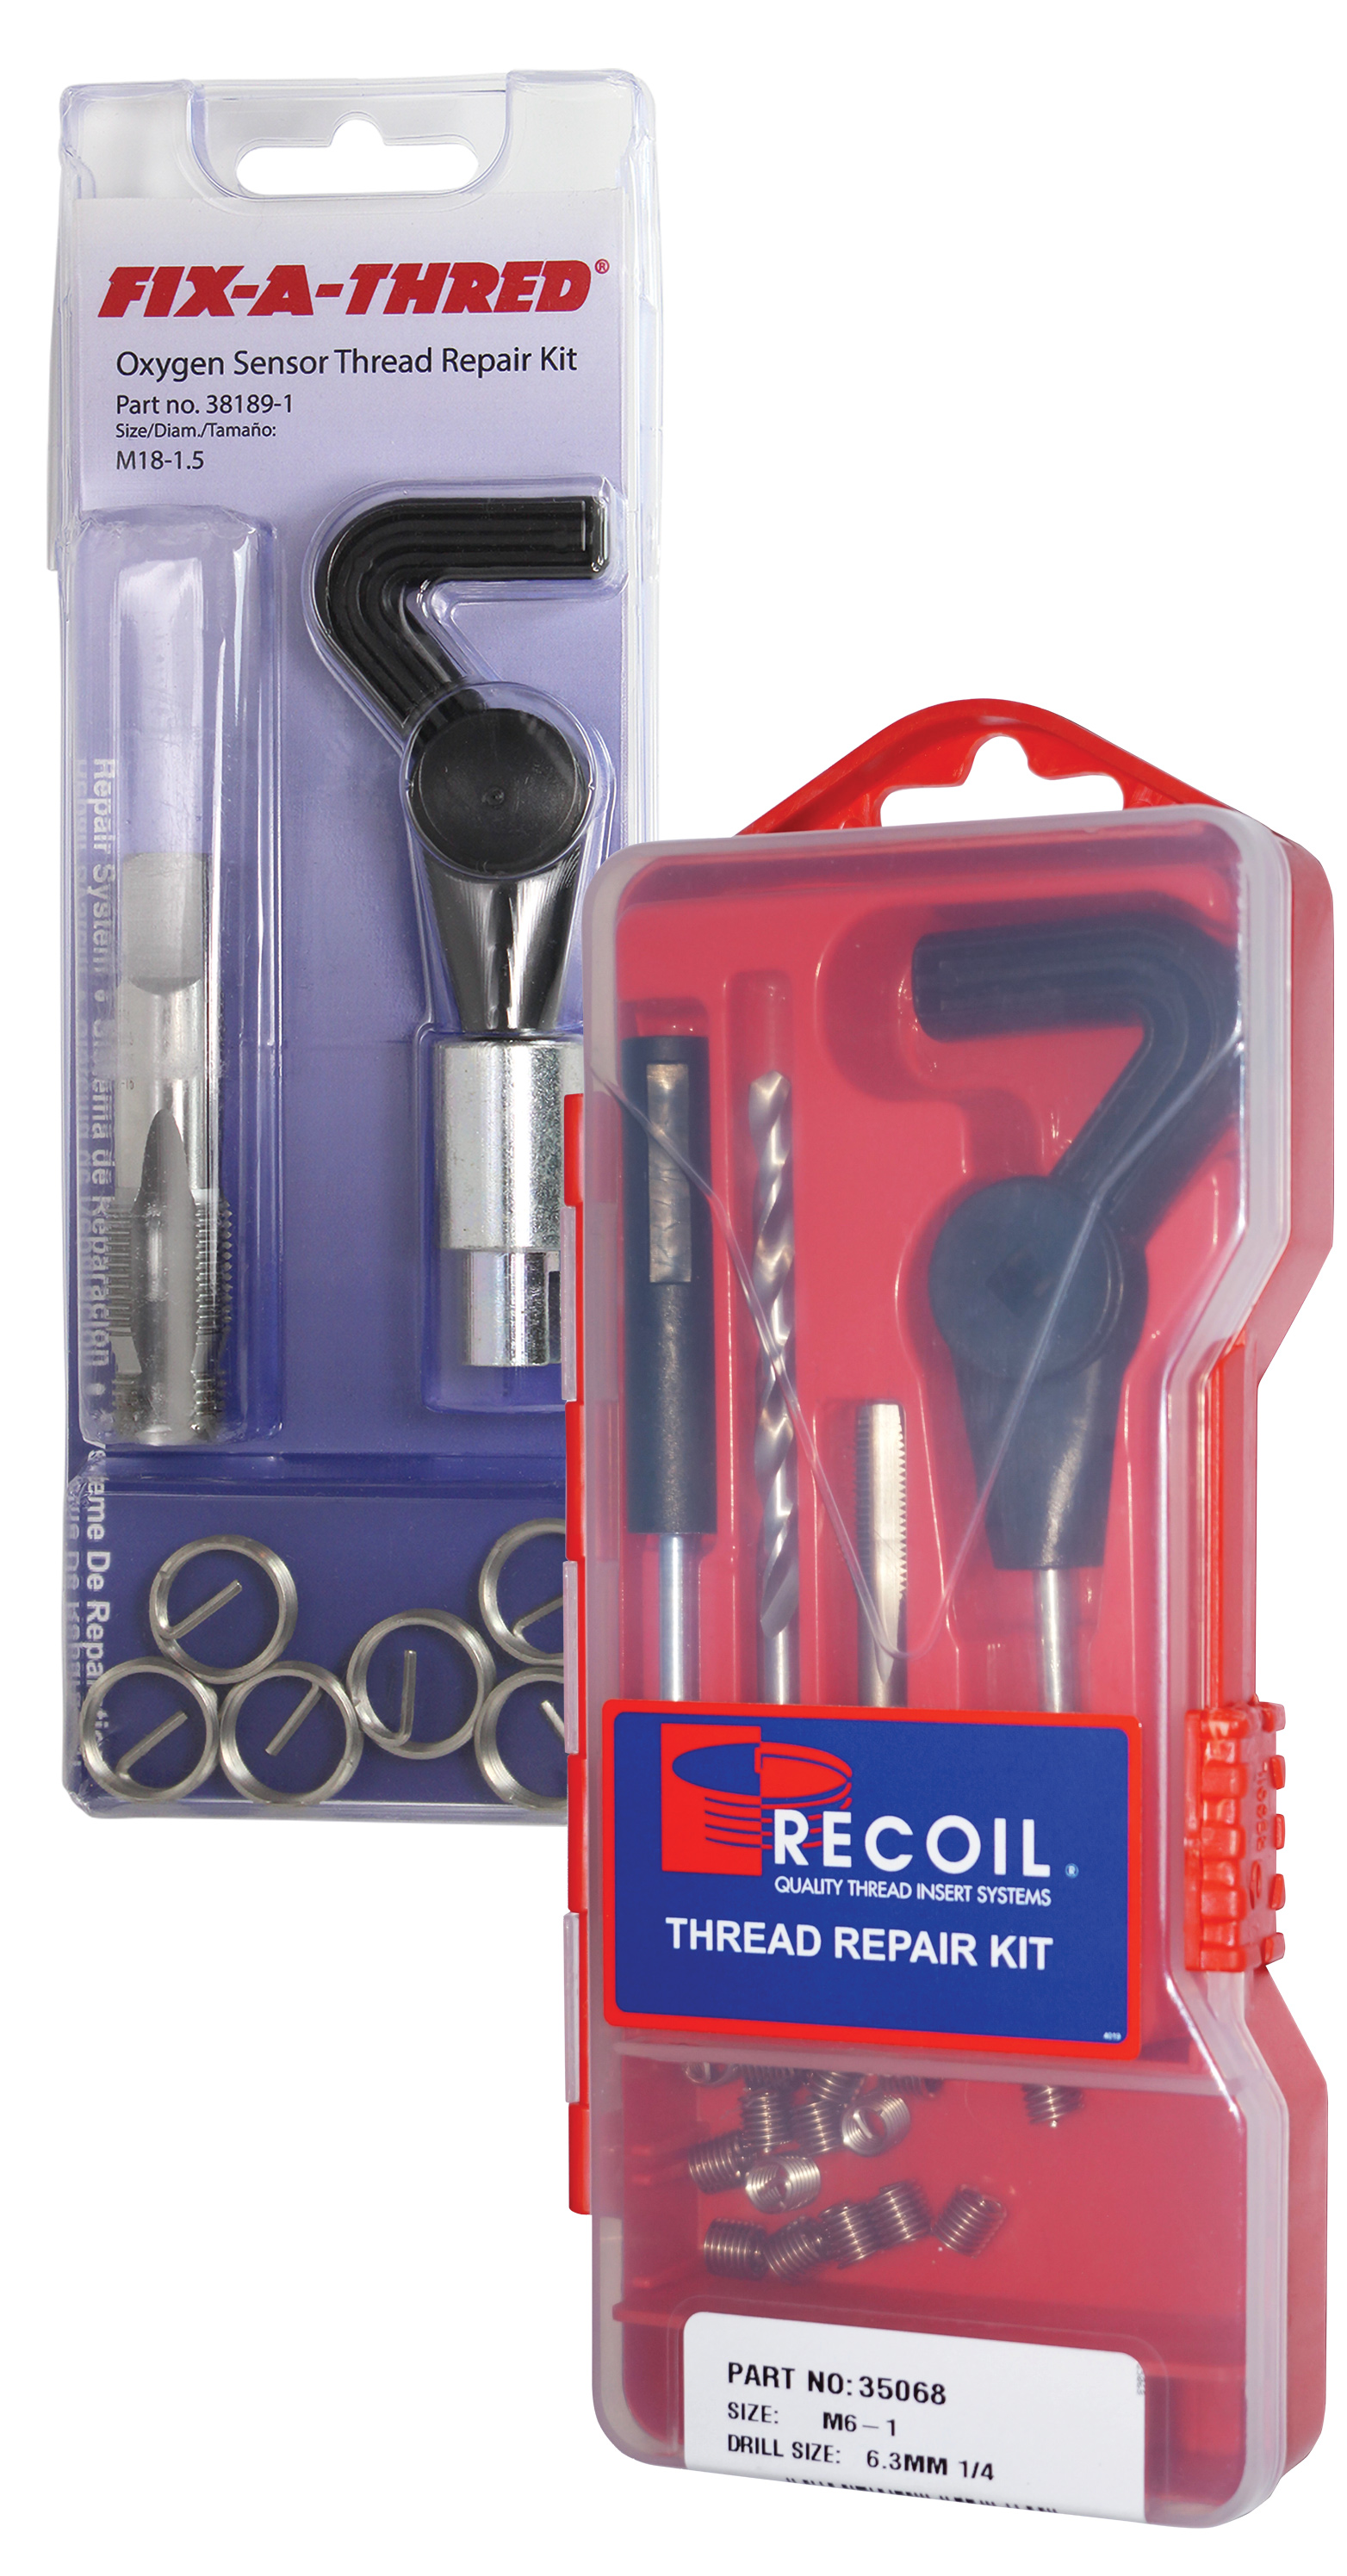 NEW Recoil UNF 9/16" 18 TPI Thread Repair Kit With Inserts #34090 